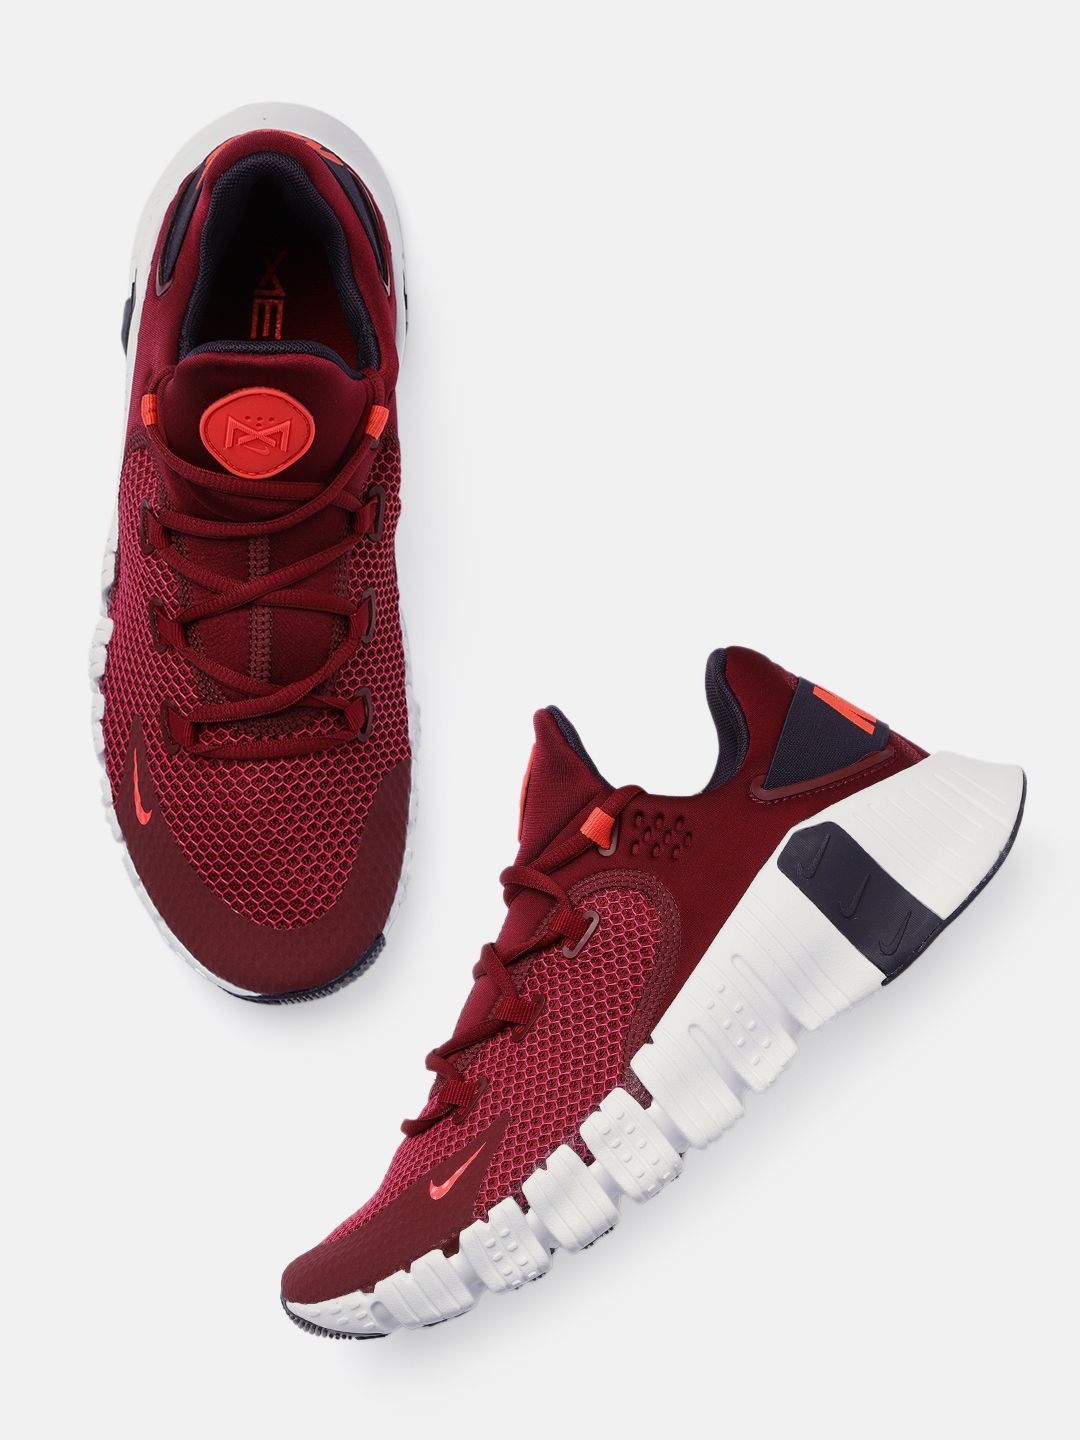 Nike Unisex Maroon FREE METCON 4 Training Shoes Price in India